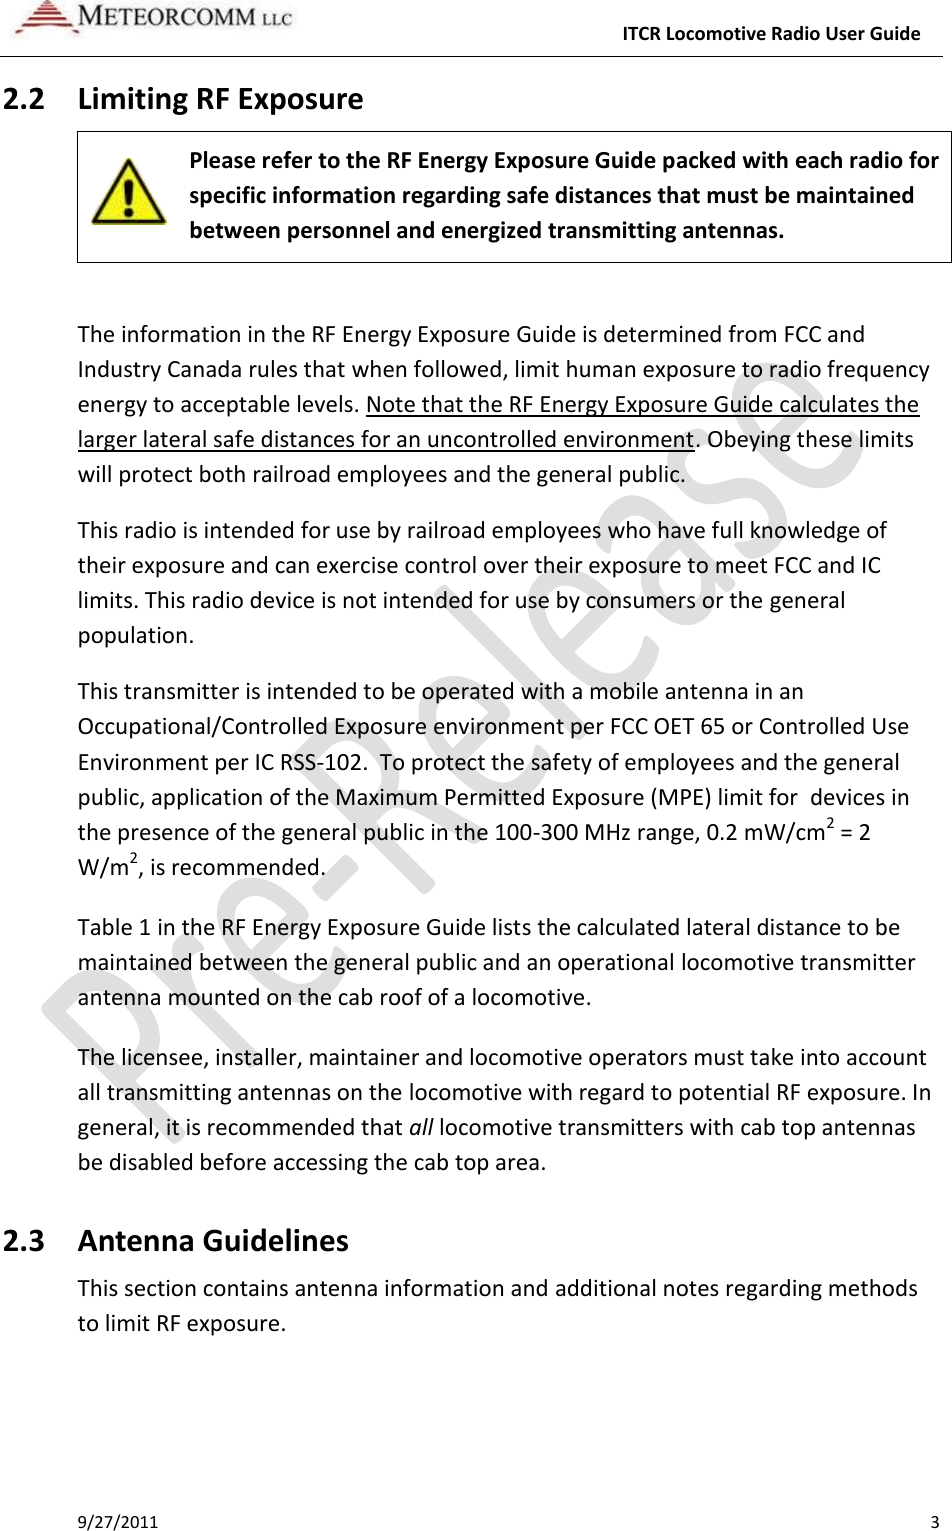     ITCR Locomotive Radio User Guide 9/27/2011    3 2.2 Limiting RF Exposure  Please refer to the RF Energy Exposure Guide packed with each radio for specific information regarding safe distances that must be maintained between personnel and energized transmitting antennas.   The information in the RF Energy Exposure Guide is determined from FCC and Industry Canada rules that when followed, limit human exposure to radio frequency energy to acceptable levels. Note that the RF Energy Exposure Guide calculates the larger lateral safe distances for an uncontrolled environment. Obeying these limits will protect both railroad employees and the general public. This radio is intended for use by railroad employees who have full knowledge of their exposure and can exercise control over their exposure to meet FCC and IC limits. This radio device is not intended for use by consumers or the general population.  This transmitter is intended to be operated with a mobile antenna in an Occupational/Controlled Exposure environment per FCC OET 65 or Controlled Use Environment per IC RSS-102.  To protect the safety of employees and the general public, application of the Maximum Permitted Exposure (MPE) limit for  devices in the presence of the general public in the 100-300 MHz range, 0.2 mW/cm2 = 2 W/m2, is recommended. Table 1 in the RF Energy Exposure Guide lists the calculated lateral distance to be maintained between the general public and an operational locomotive transmitter antenna mounted on the cab roof of a locomotive.  The licensee, installer, maintainer and locomotive operators must take into account all transmitting antennas on the locomotive with regard to potential RF exposure. In general, it is recommended that all locomotive transmitters with cab top antennas be disabled before accessing the cab top area. 2.3 Antenna Guidelines  This section contains antenna information and additional notes regarding methods to limit RF exposure. 